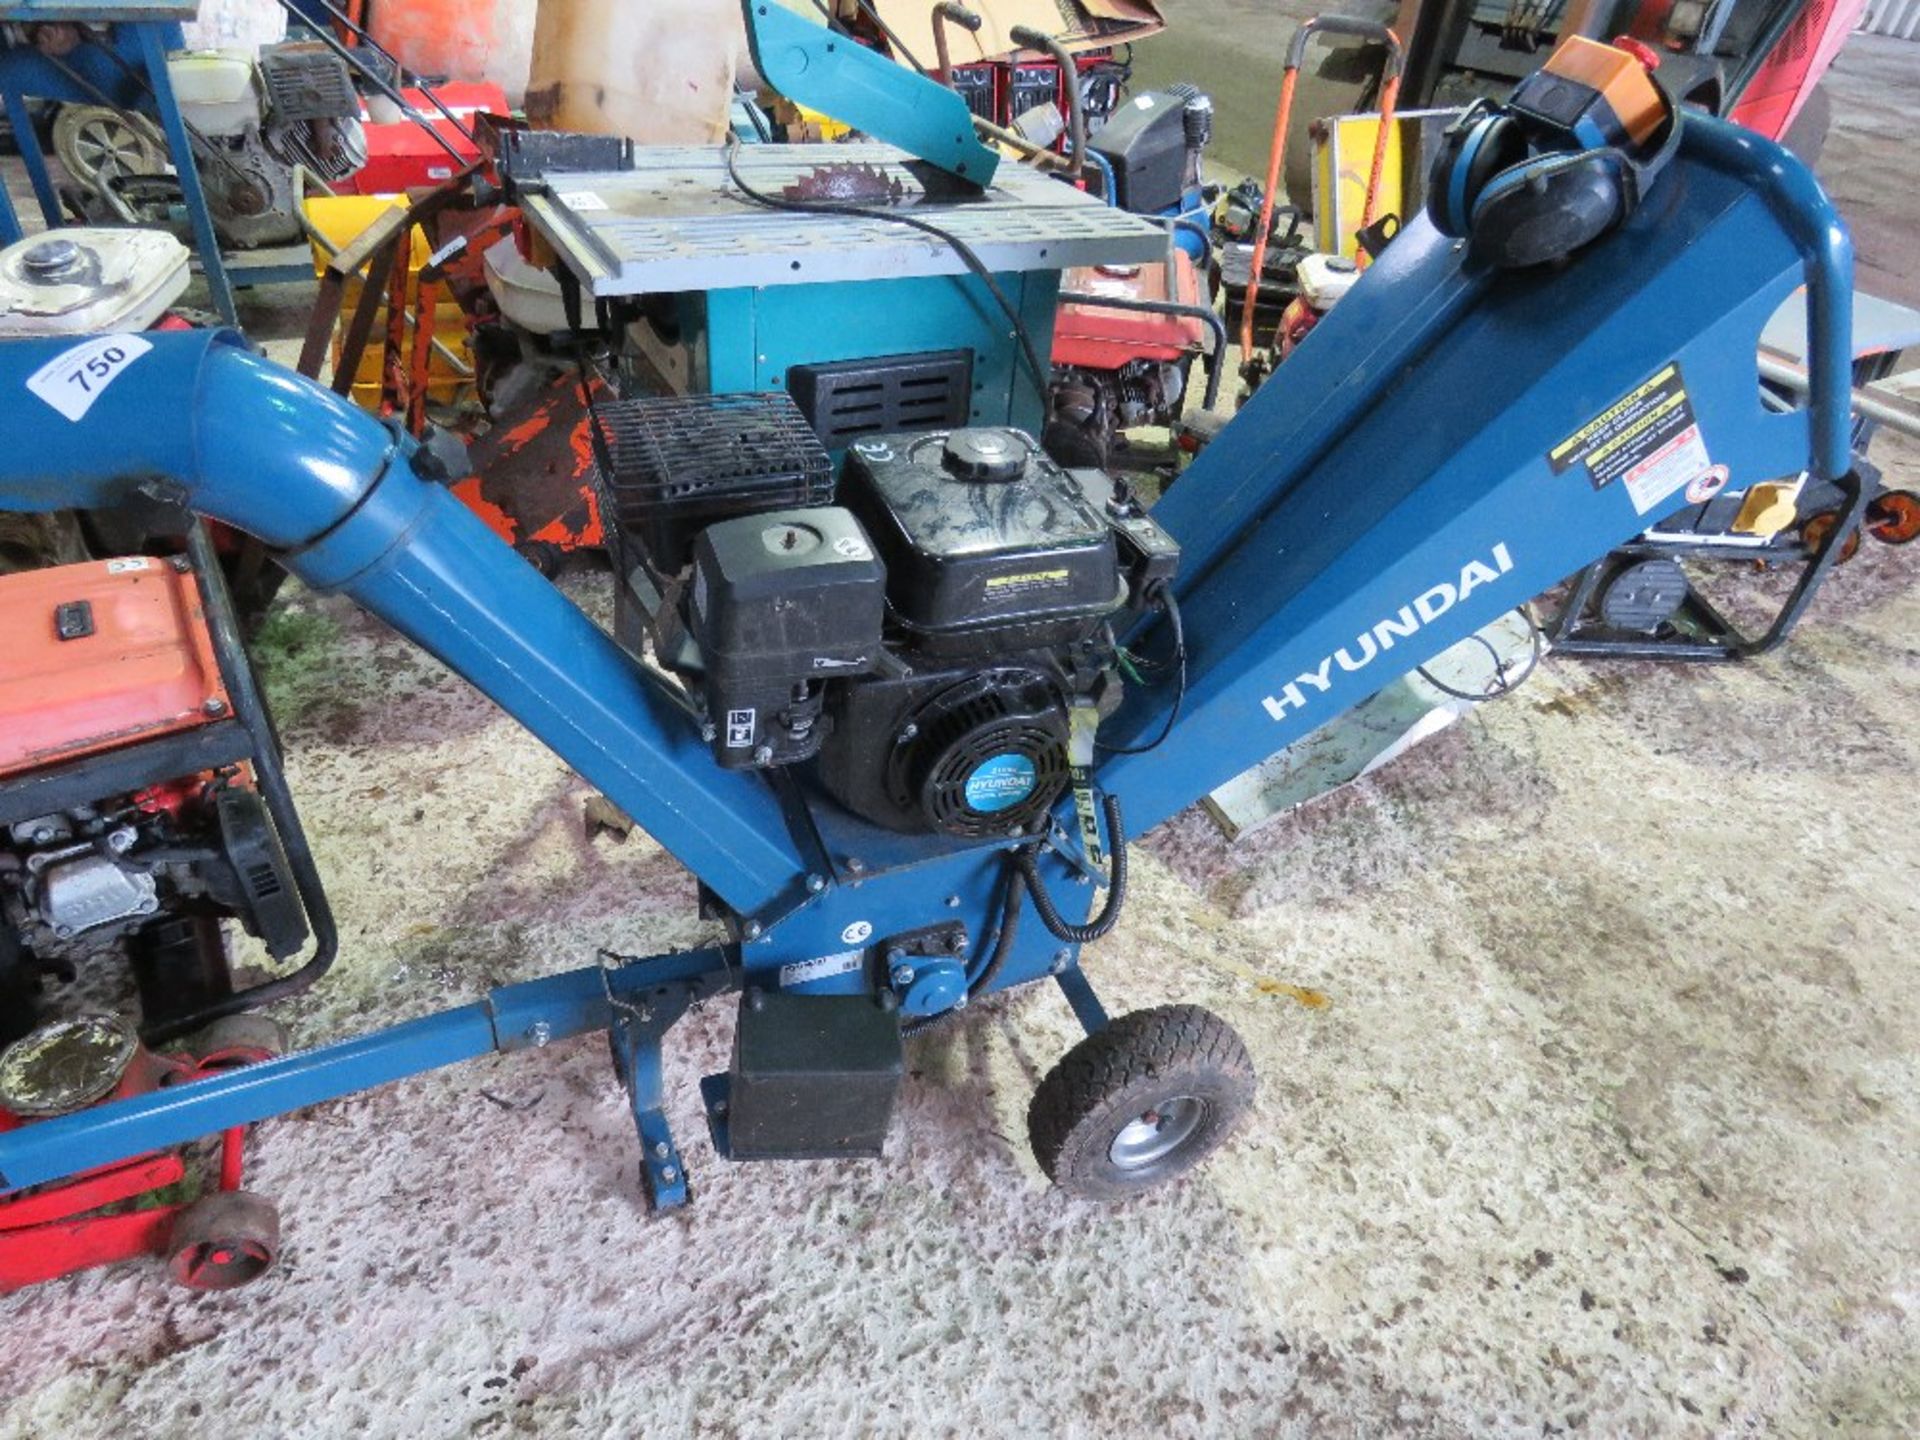 HYUNDAI HYCH7070E-2 PETROL ENGINED CHIPPER, TOWABLE BY GARDEN TRACTOR. KEY START, APPEARS LITTLE USE - Bild 2 aus 8